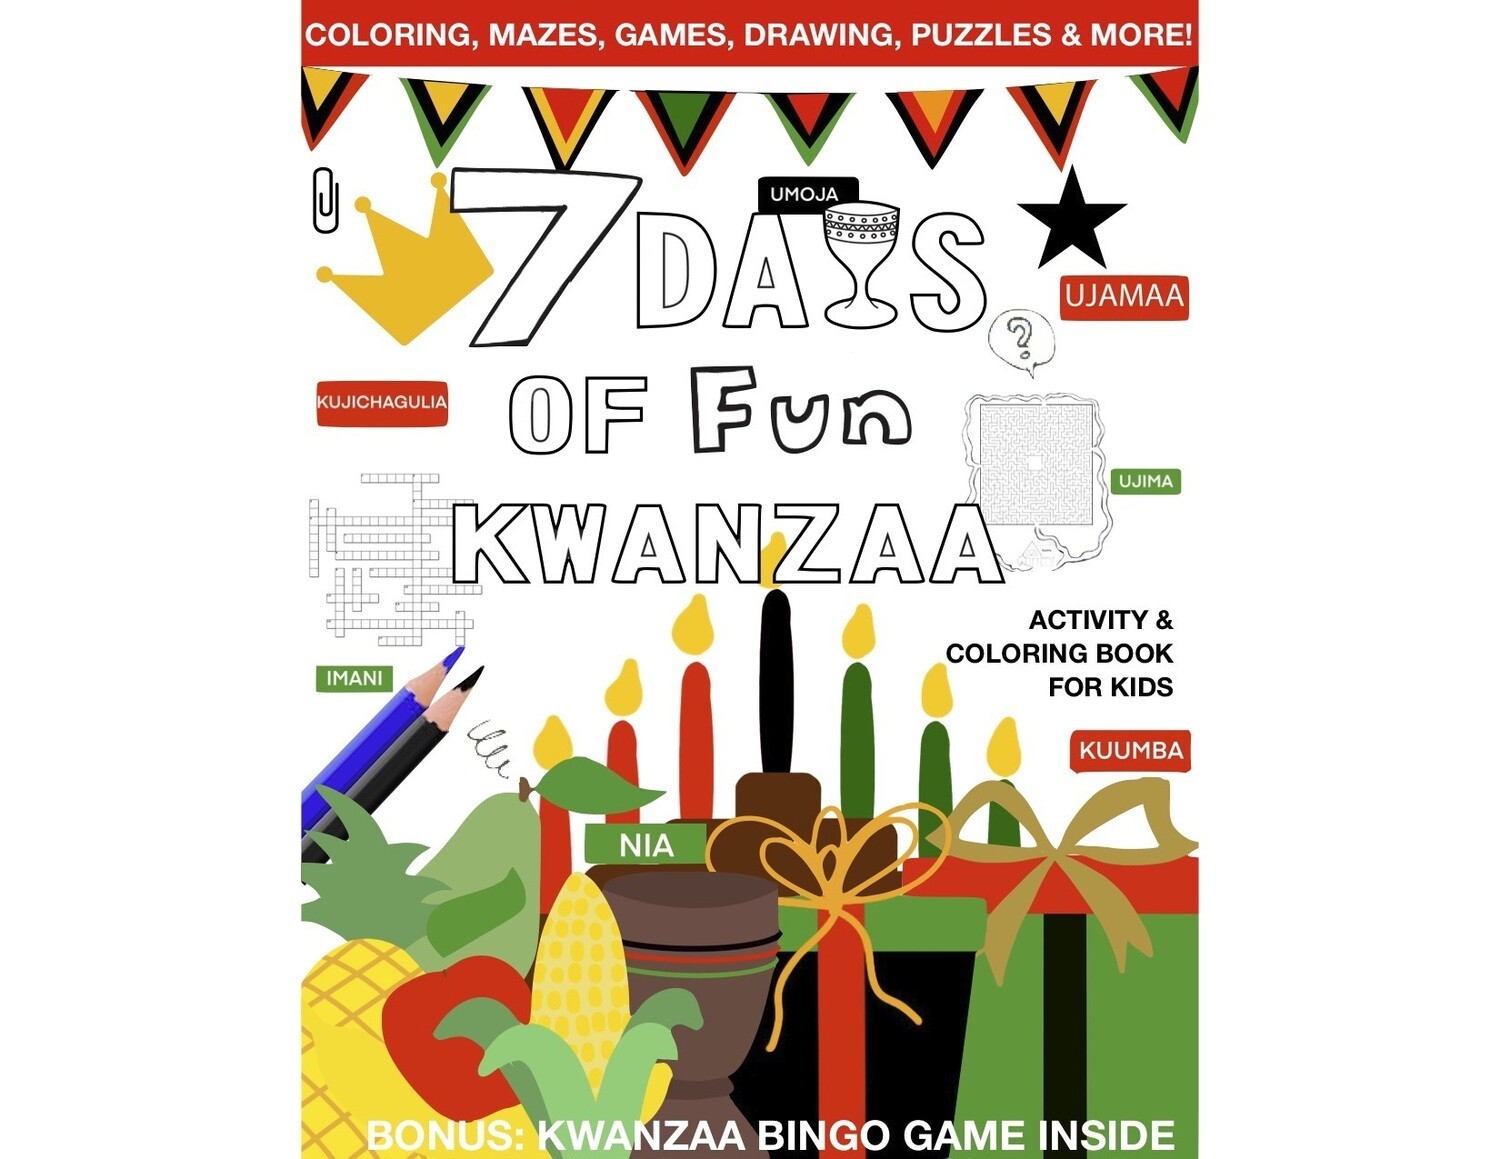 7 Days of Fun: Kwanzaa Kids Activity and Coloring Book for Kids"-Digital Unlimited